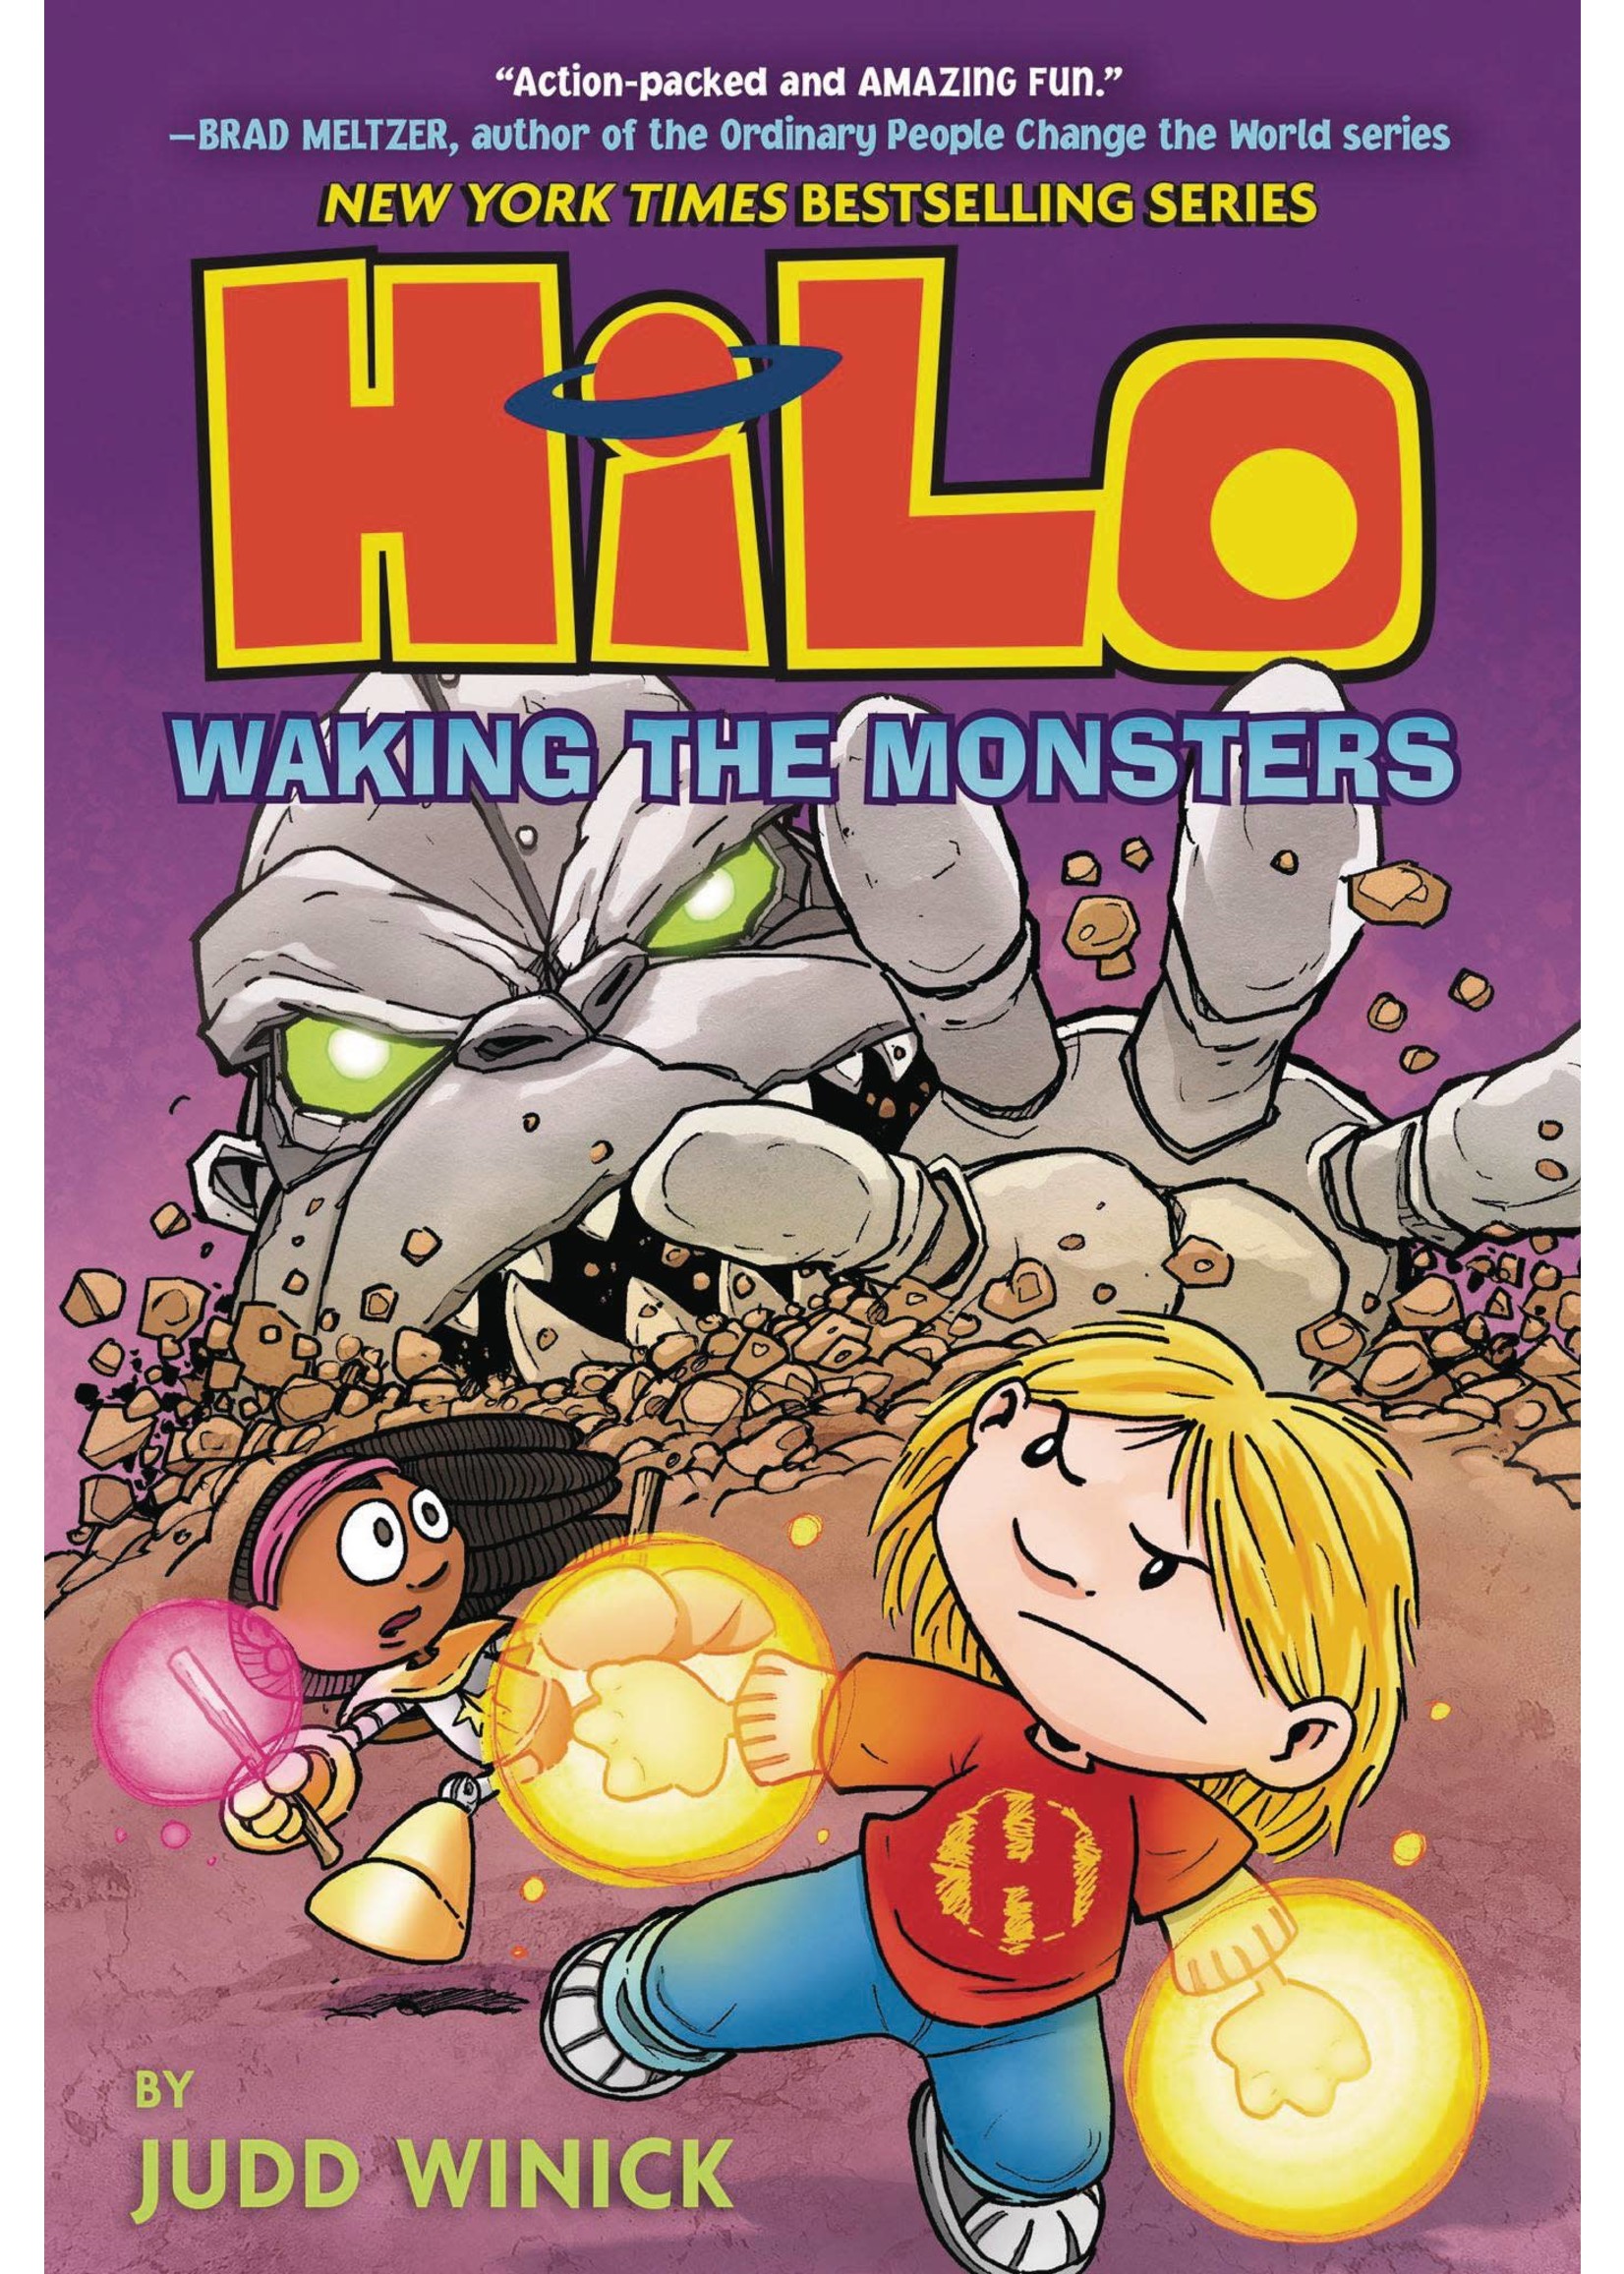 RANDOM HOUSE HILO GN VOL 04 WAKING THE MONSTERS